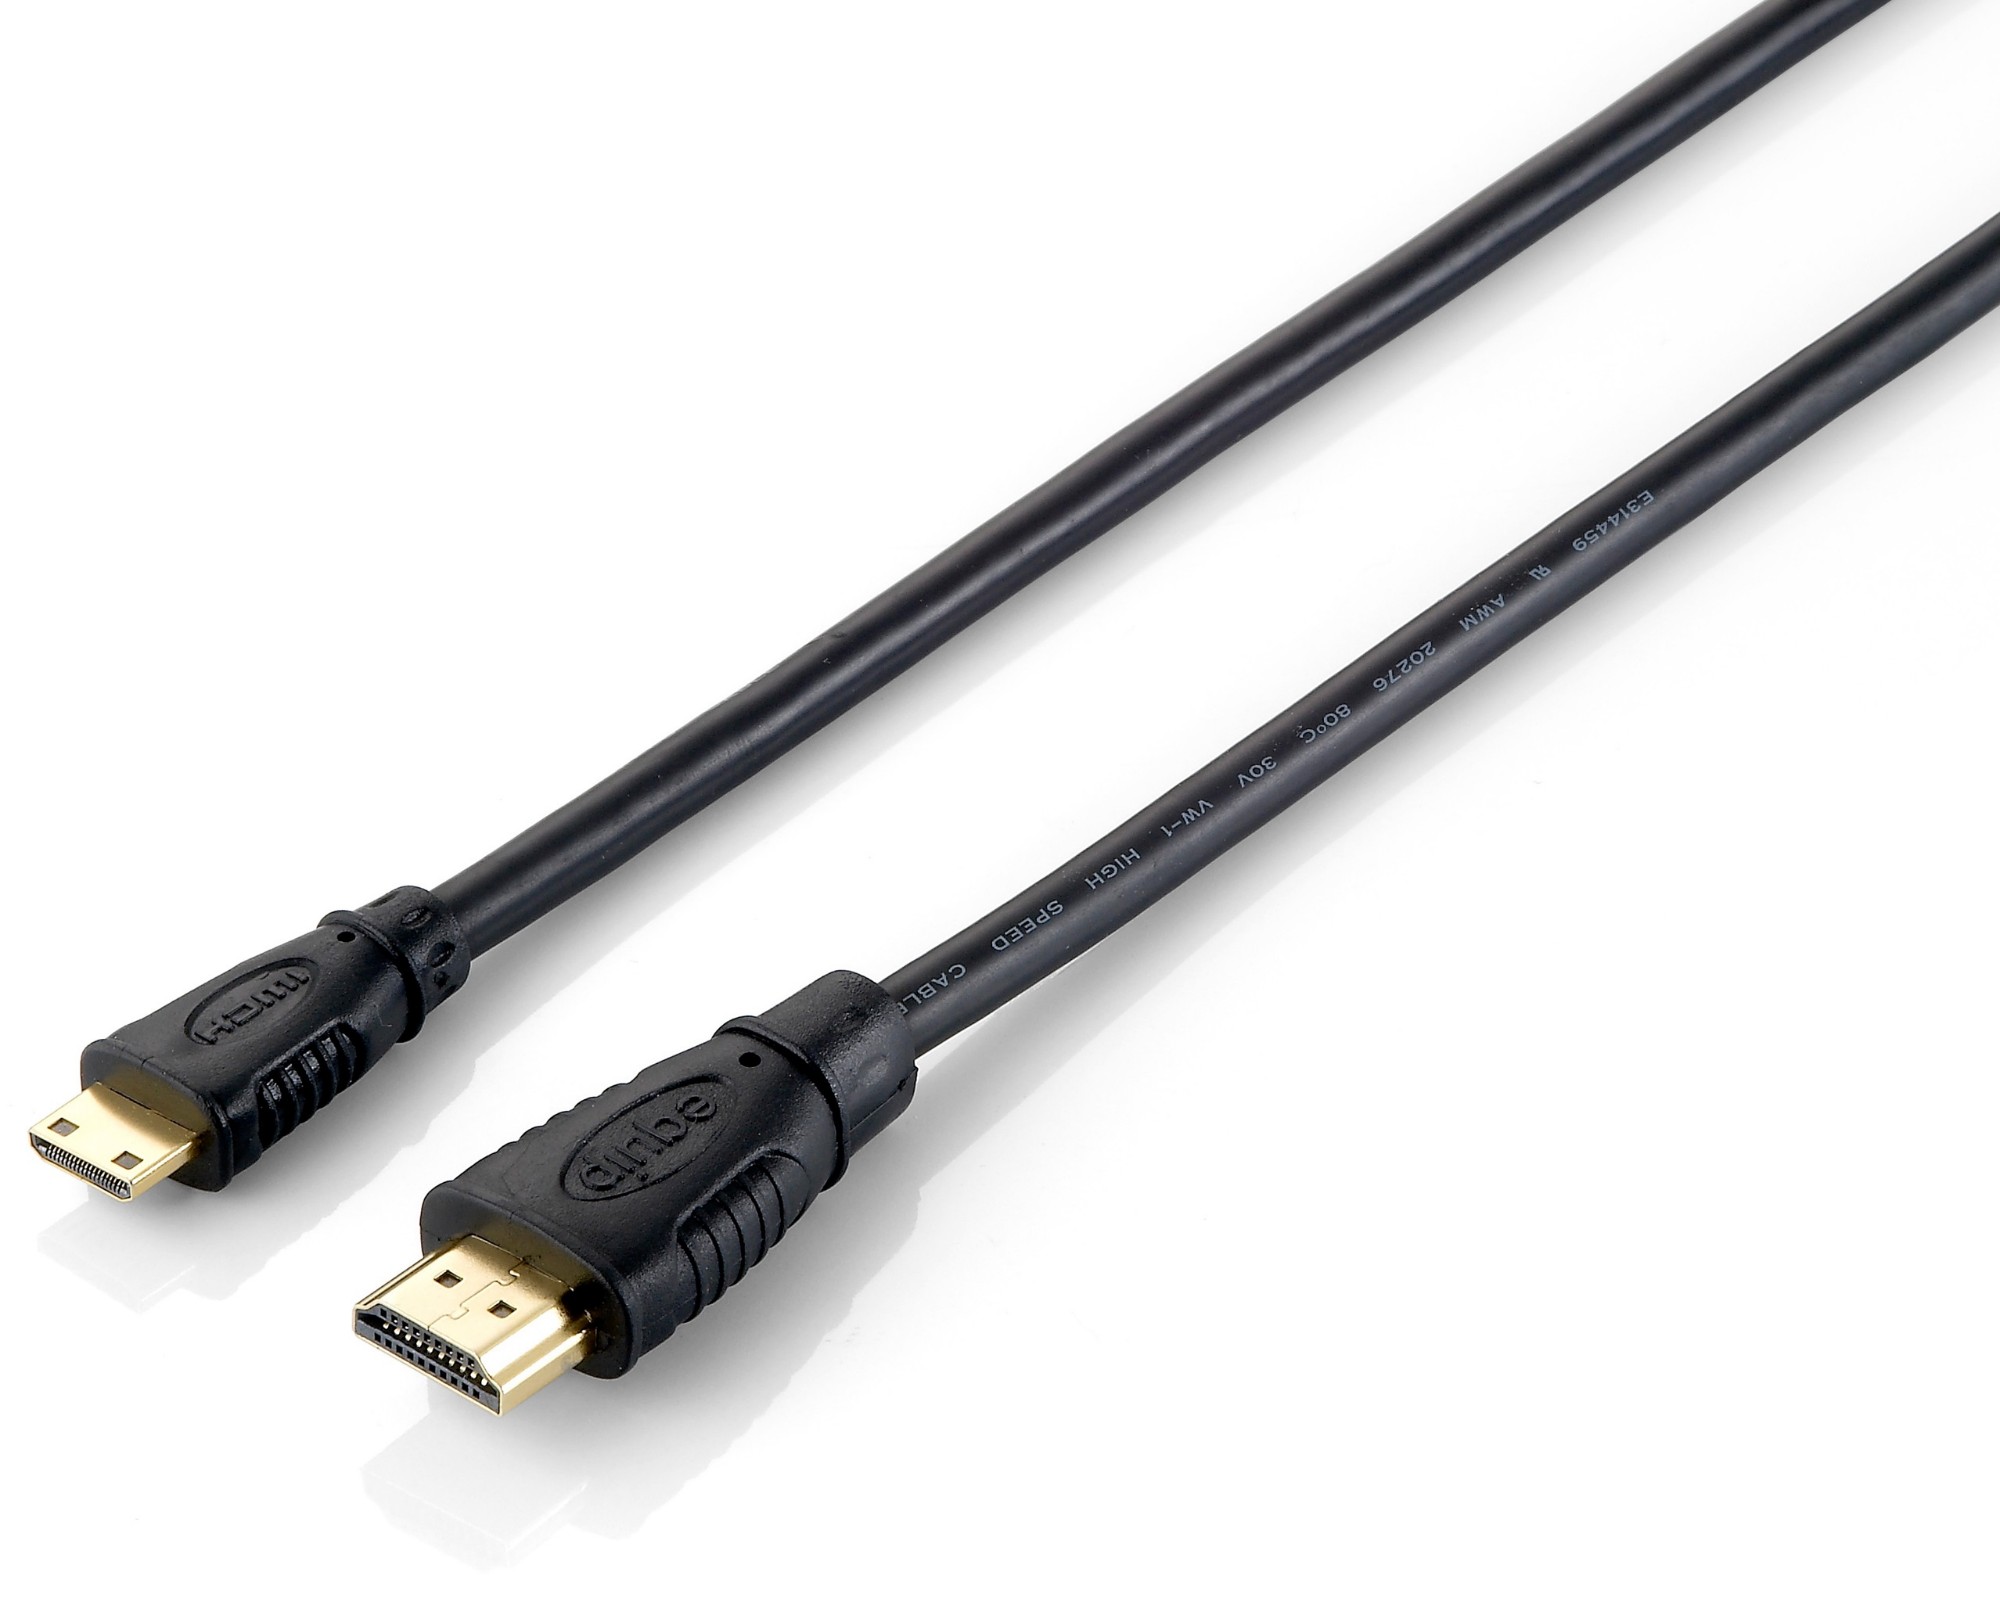 Photos - Cable (video, audio, USB) Equip HDMI to Mini HDMI Cable, 2m 119307 